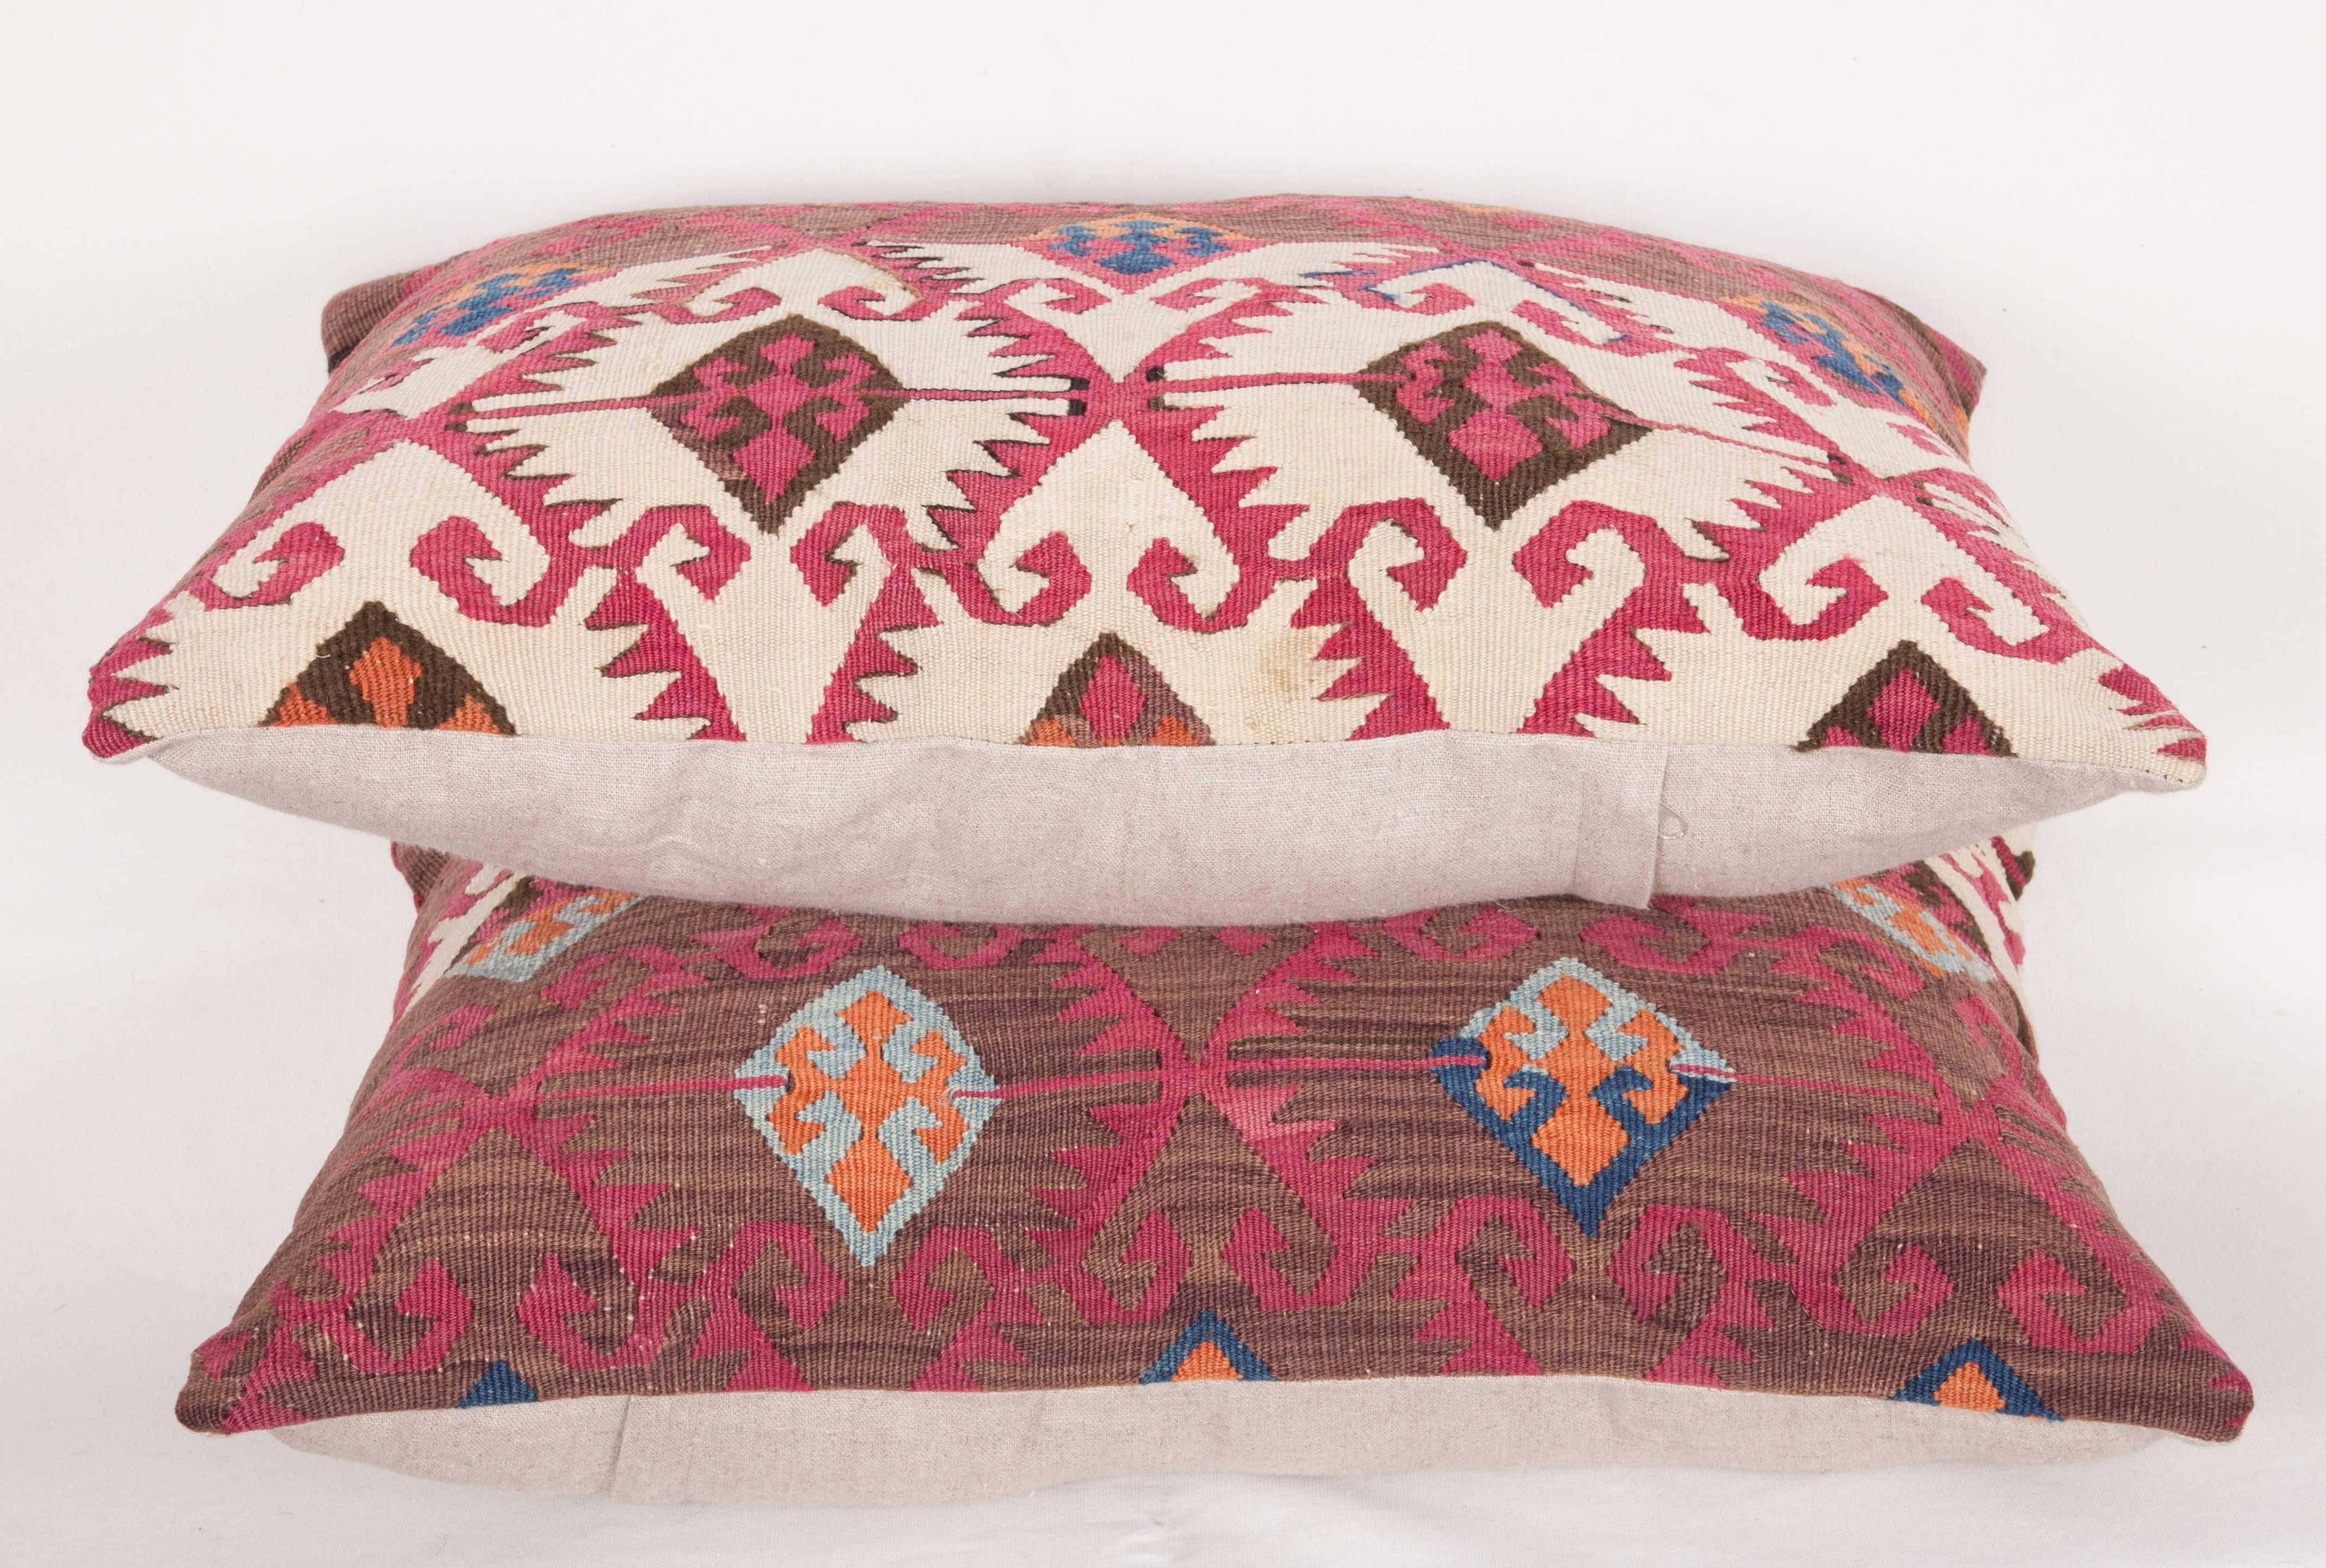 Wool Antique Pillows Made Out of a 19th Century Anatolian Kilim Fragment